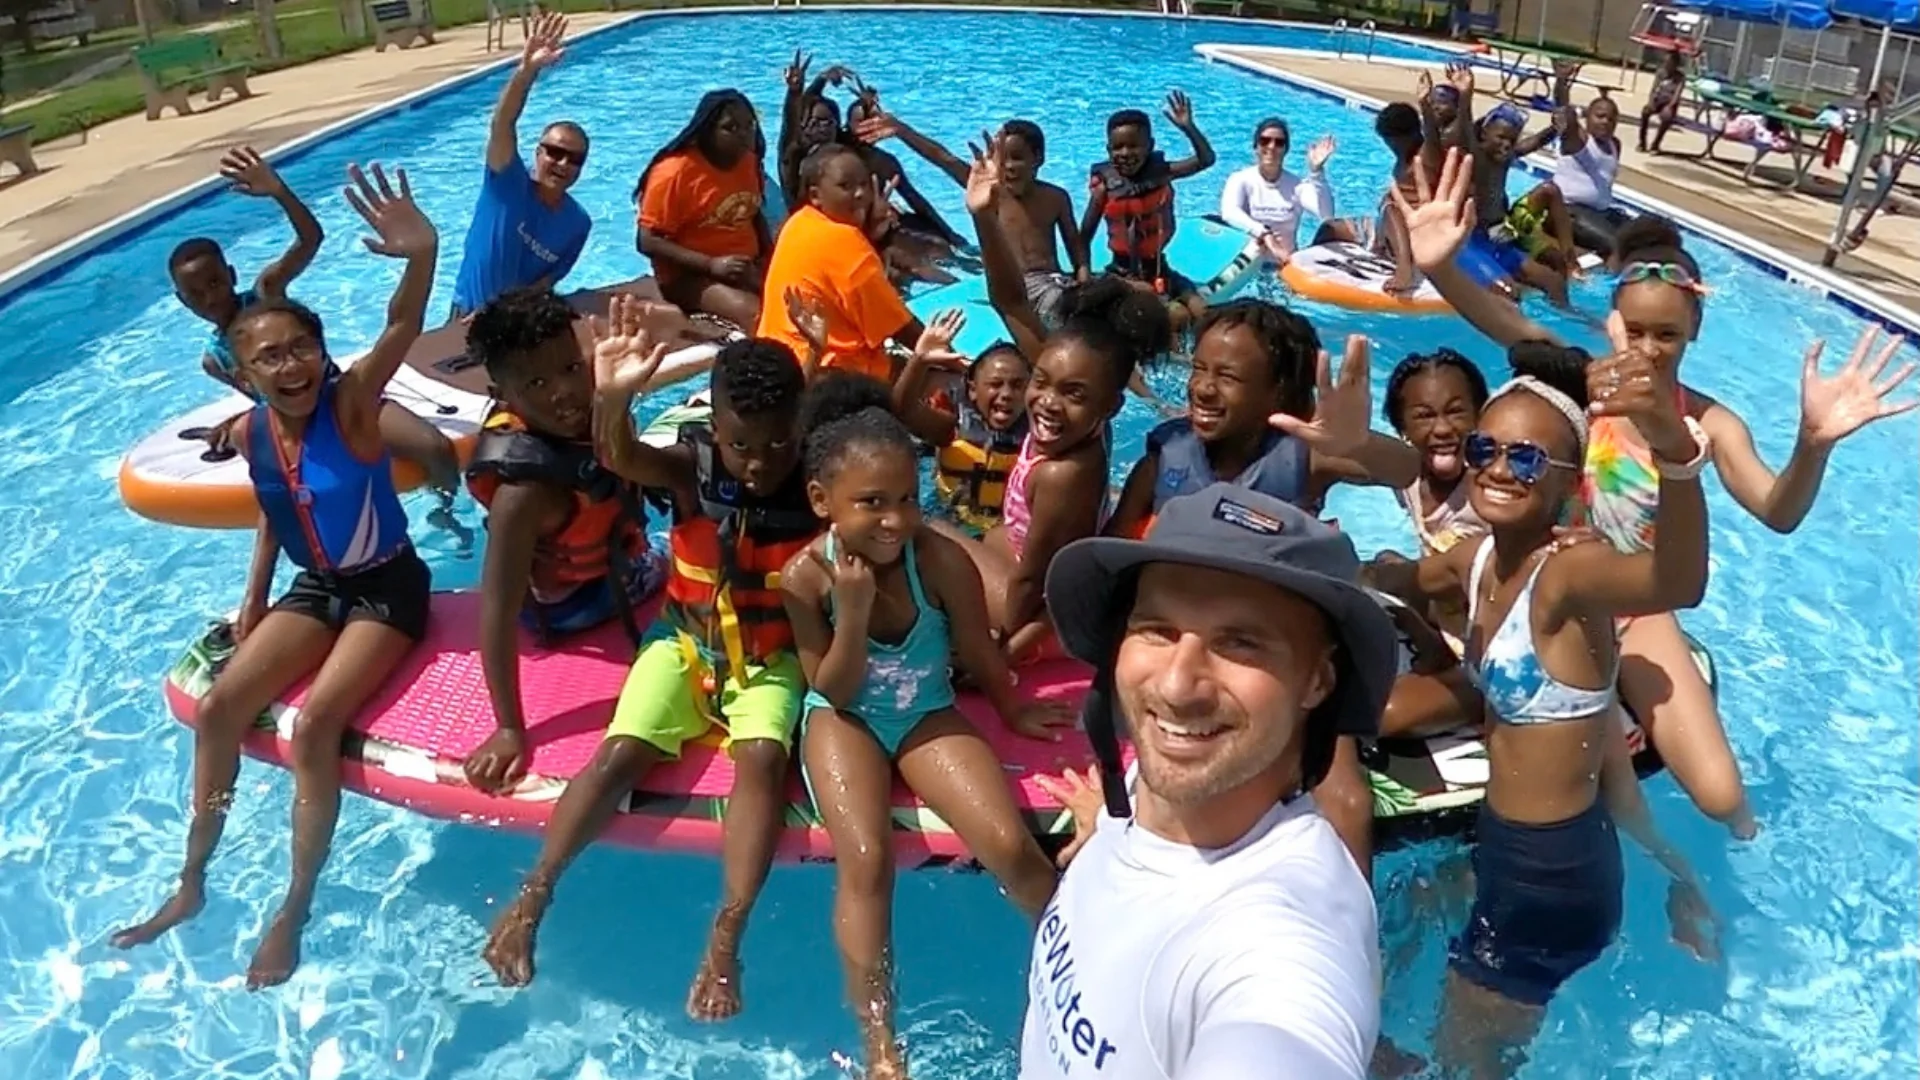 The Live Water president takes a selfie with a bunch of kids in a pool